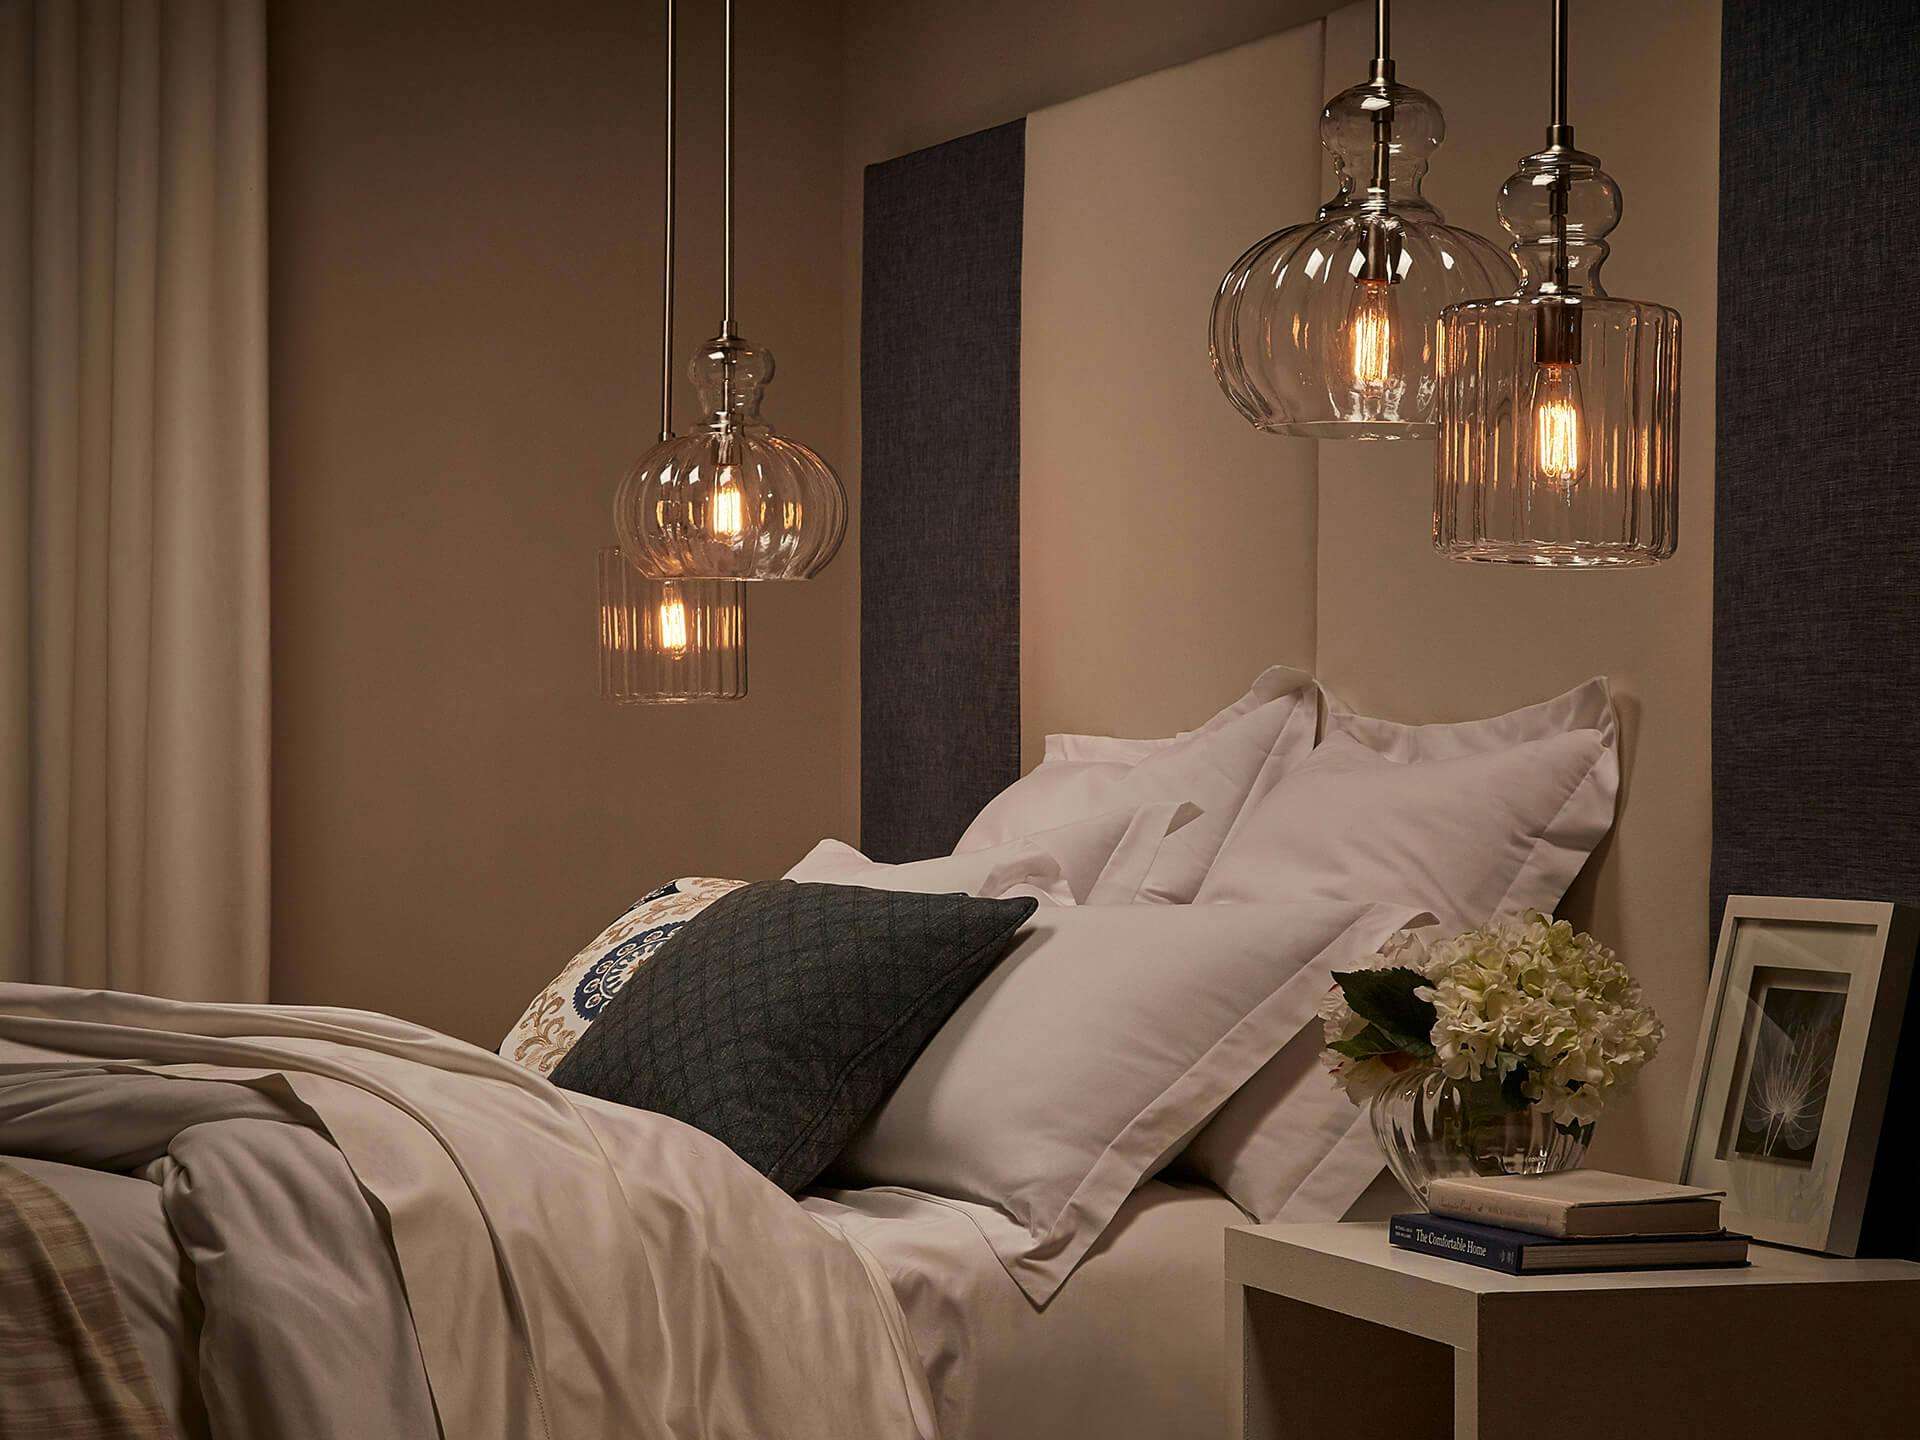 A bed surrounded by Riviera hanging lights in a dimly lit bedroom at night